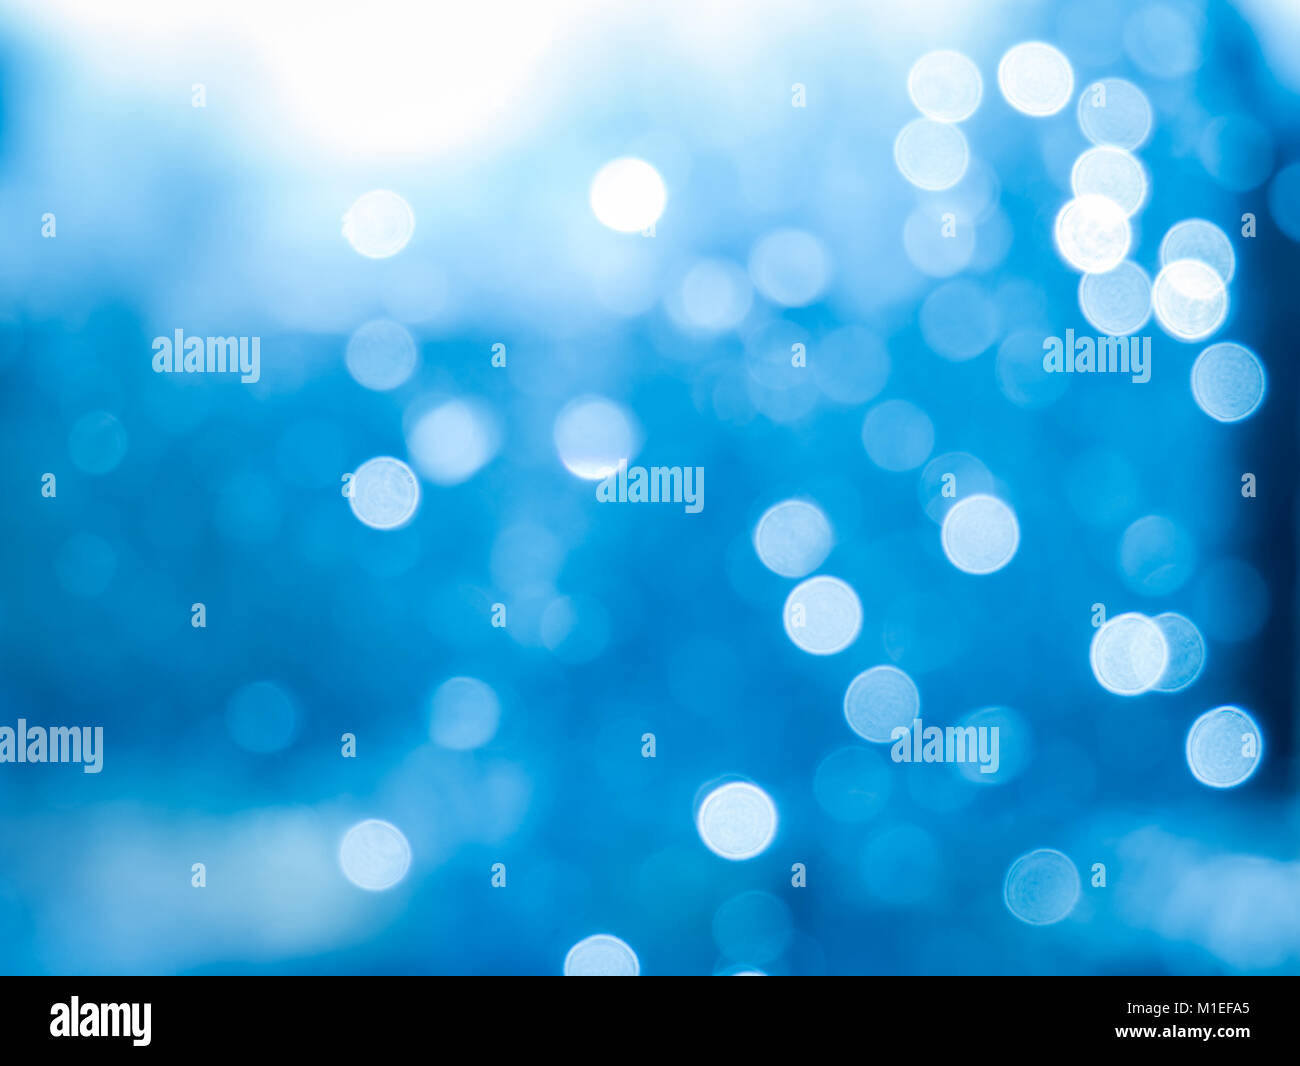 Baby Blue Background With Small White Flowers And Bokeh With Copy Space  Stock Photo - Download Image Now - iStock